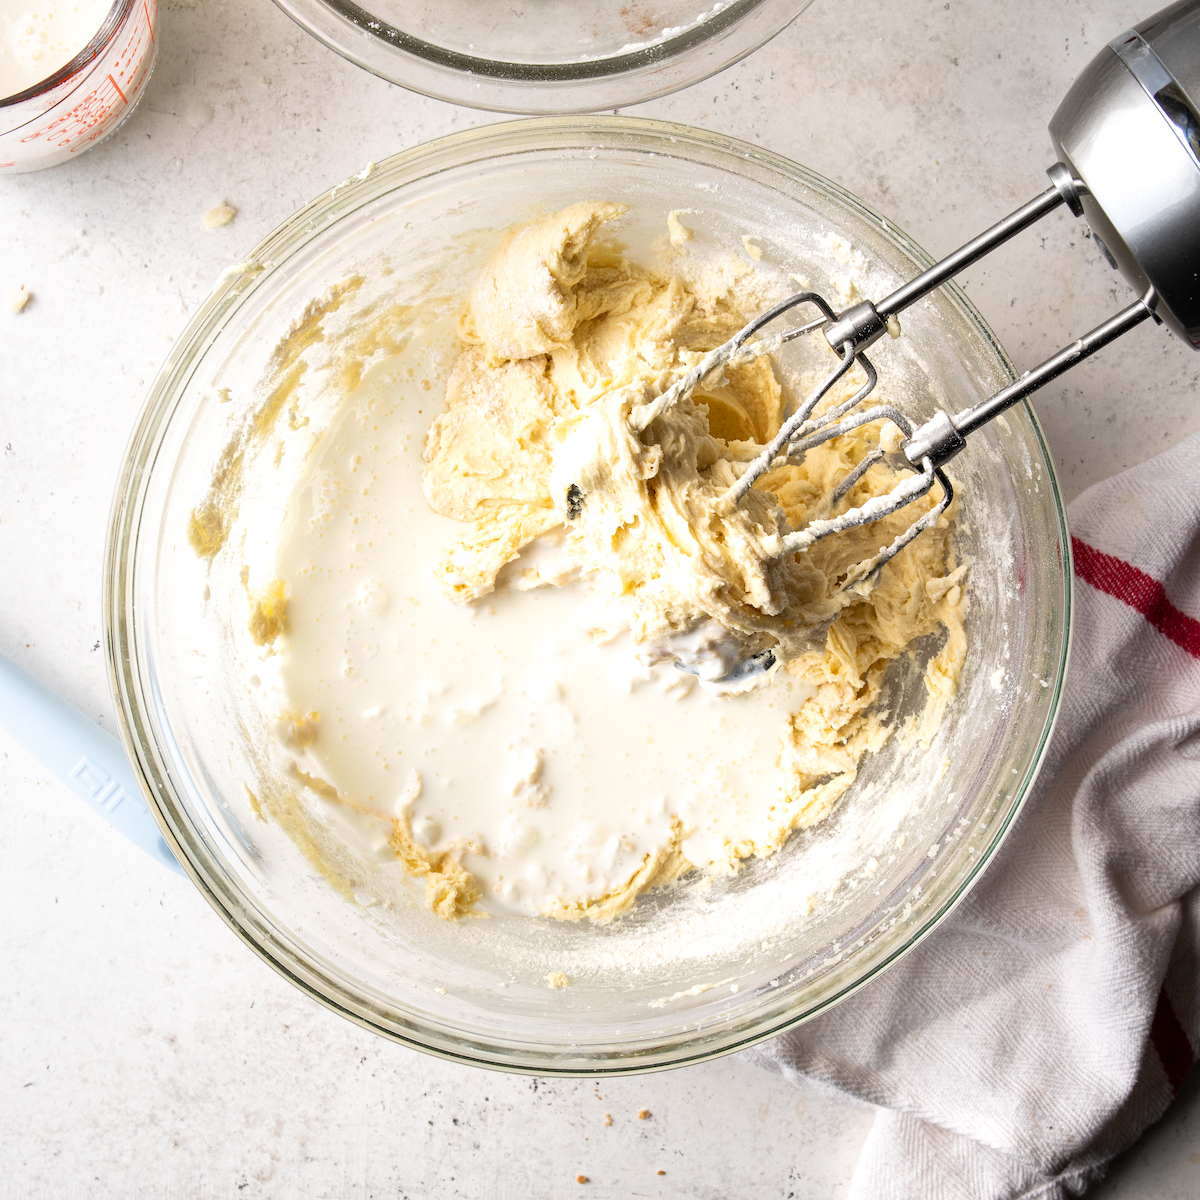 Adding the milk sour cream mixture to the cake batter.